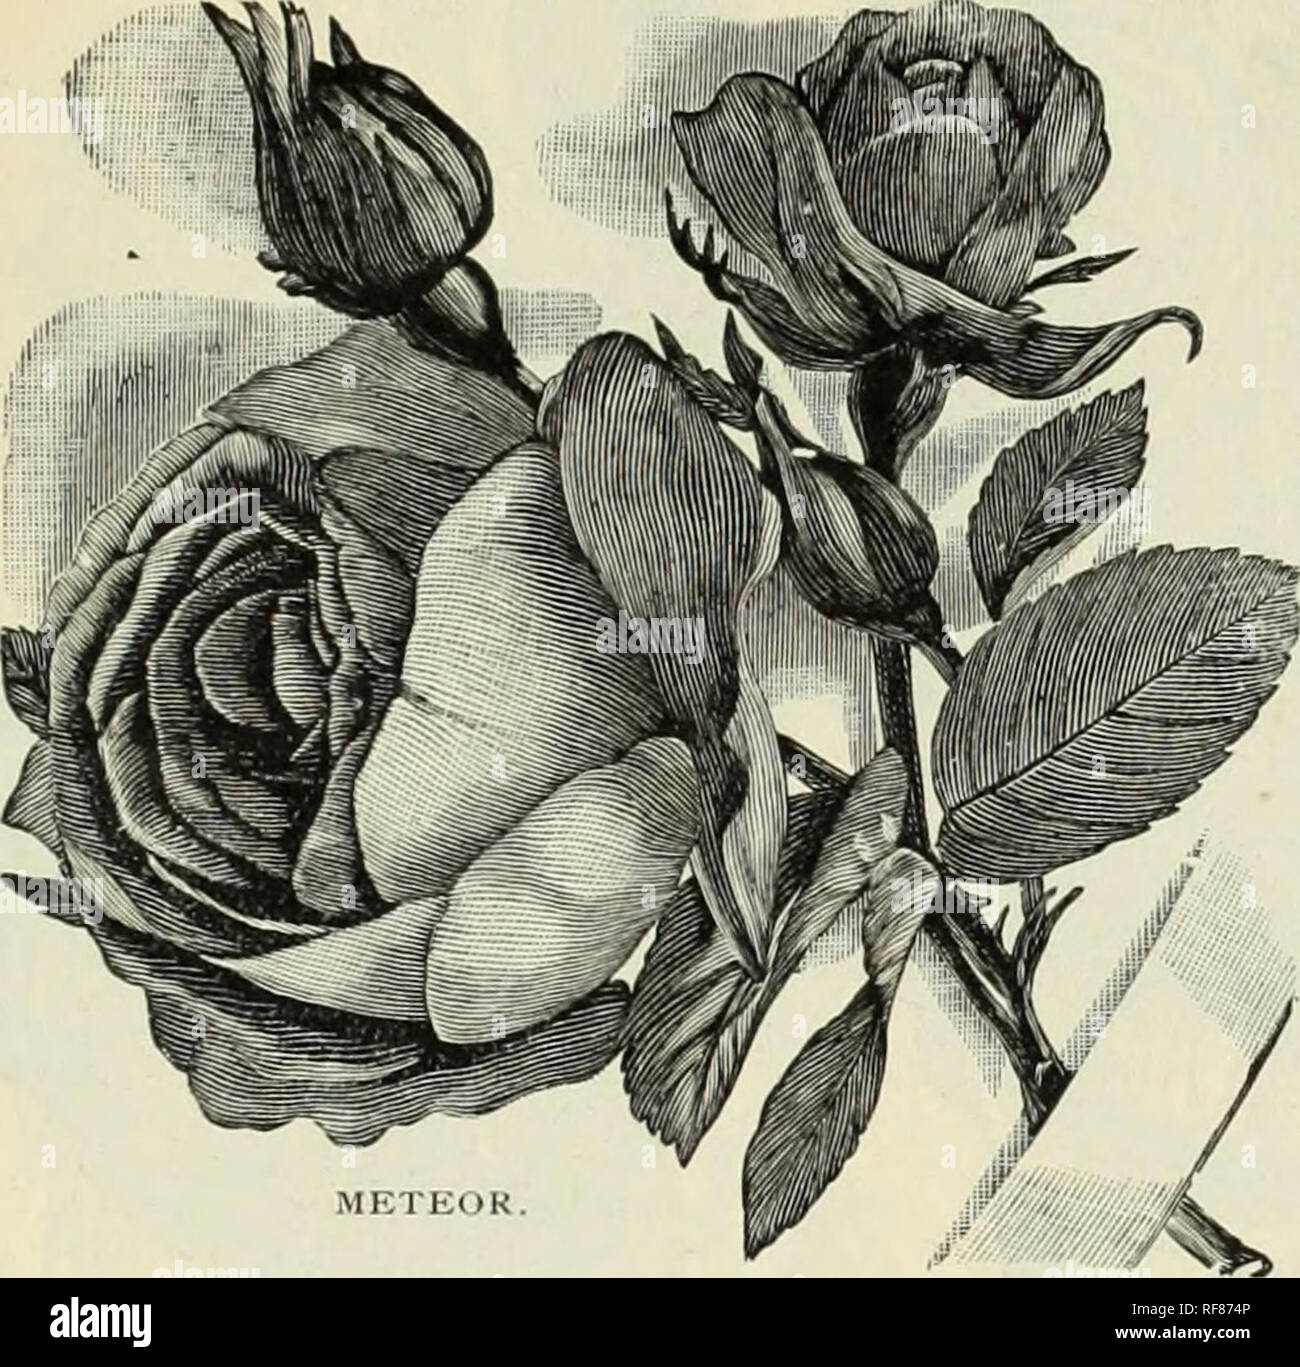 . Catalogue of roses, house and bedding plants and bulbs, 1893. Nursery stock Florida Catalogs; Roses Catalogs; Flowers Catalogs. ROSES, GREENHOUSE A.ND BEDDING PLANTS, ETC. 5 HYBRID TEA ROSES. *Antoiiie Verdier. Rose color, silvt i v ed&lt;,'e ; vigorous and free-blooming. lo cts. American Beauty. Deep, glowing carmine ; wonderfully free-flowering. As a grand rose has taken first rank. 15c. Duchess of Albany. A sport from La France ; it is called the Red La France. 15 cts. 'Duchess of Connaught. Large, very full, fine form ; color delicate silvery rose, with l)riglit crimson center. 10 cts. F Stock Photo